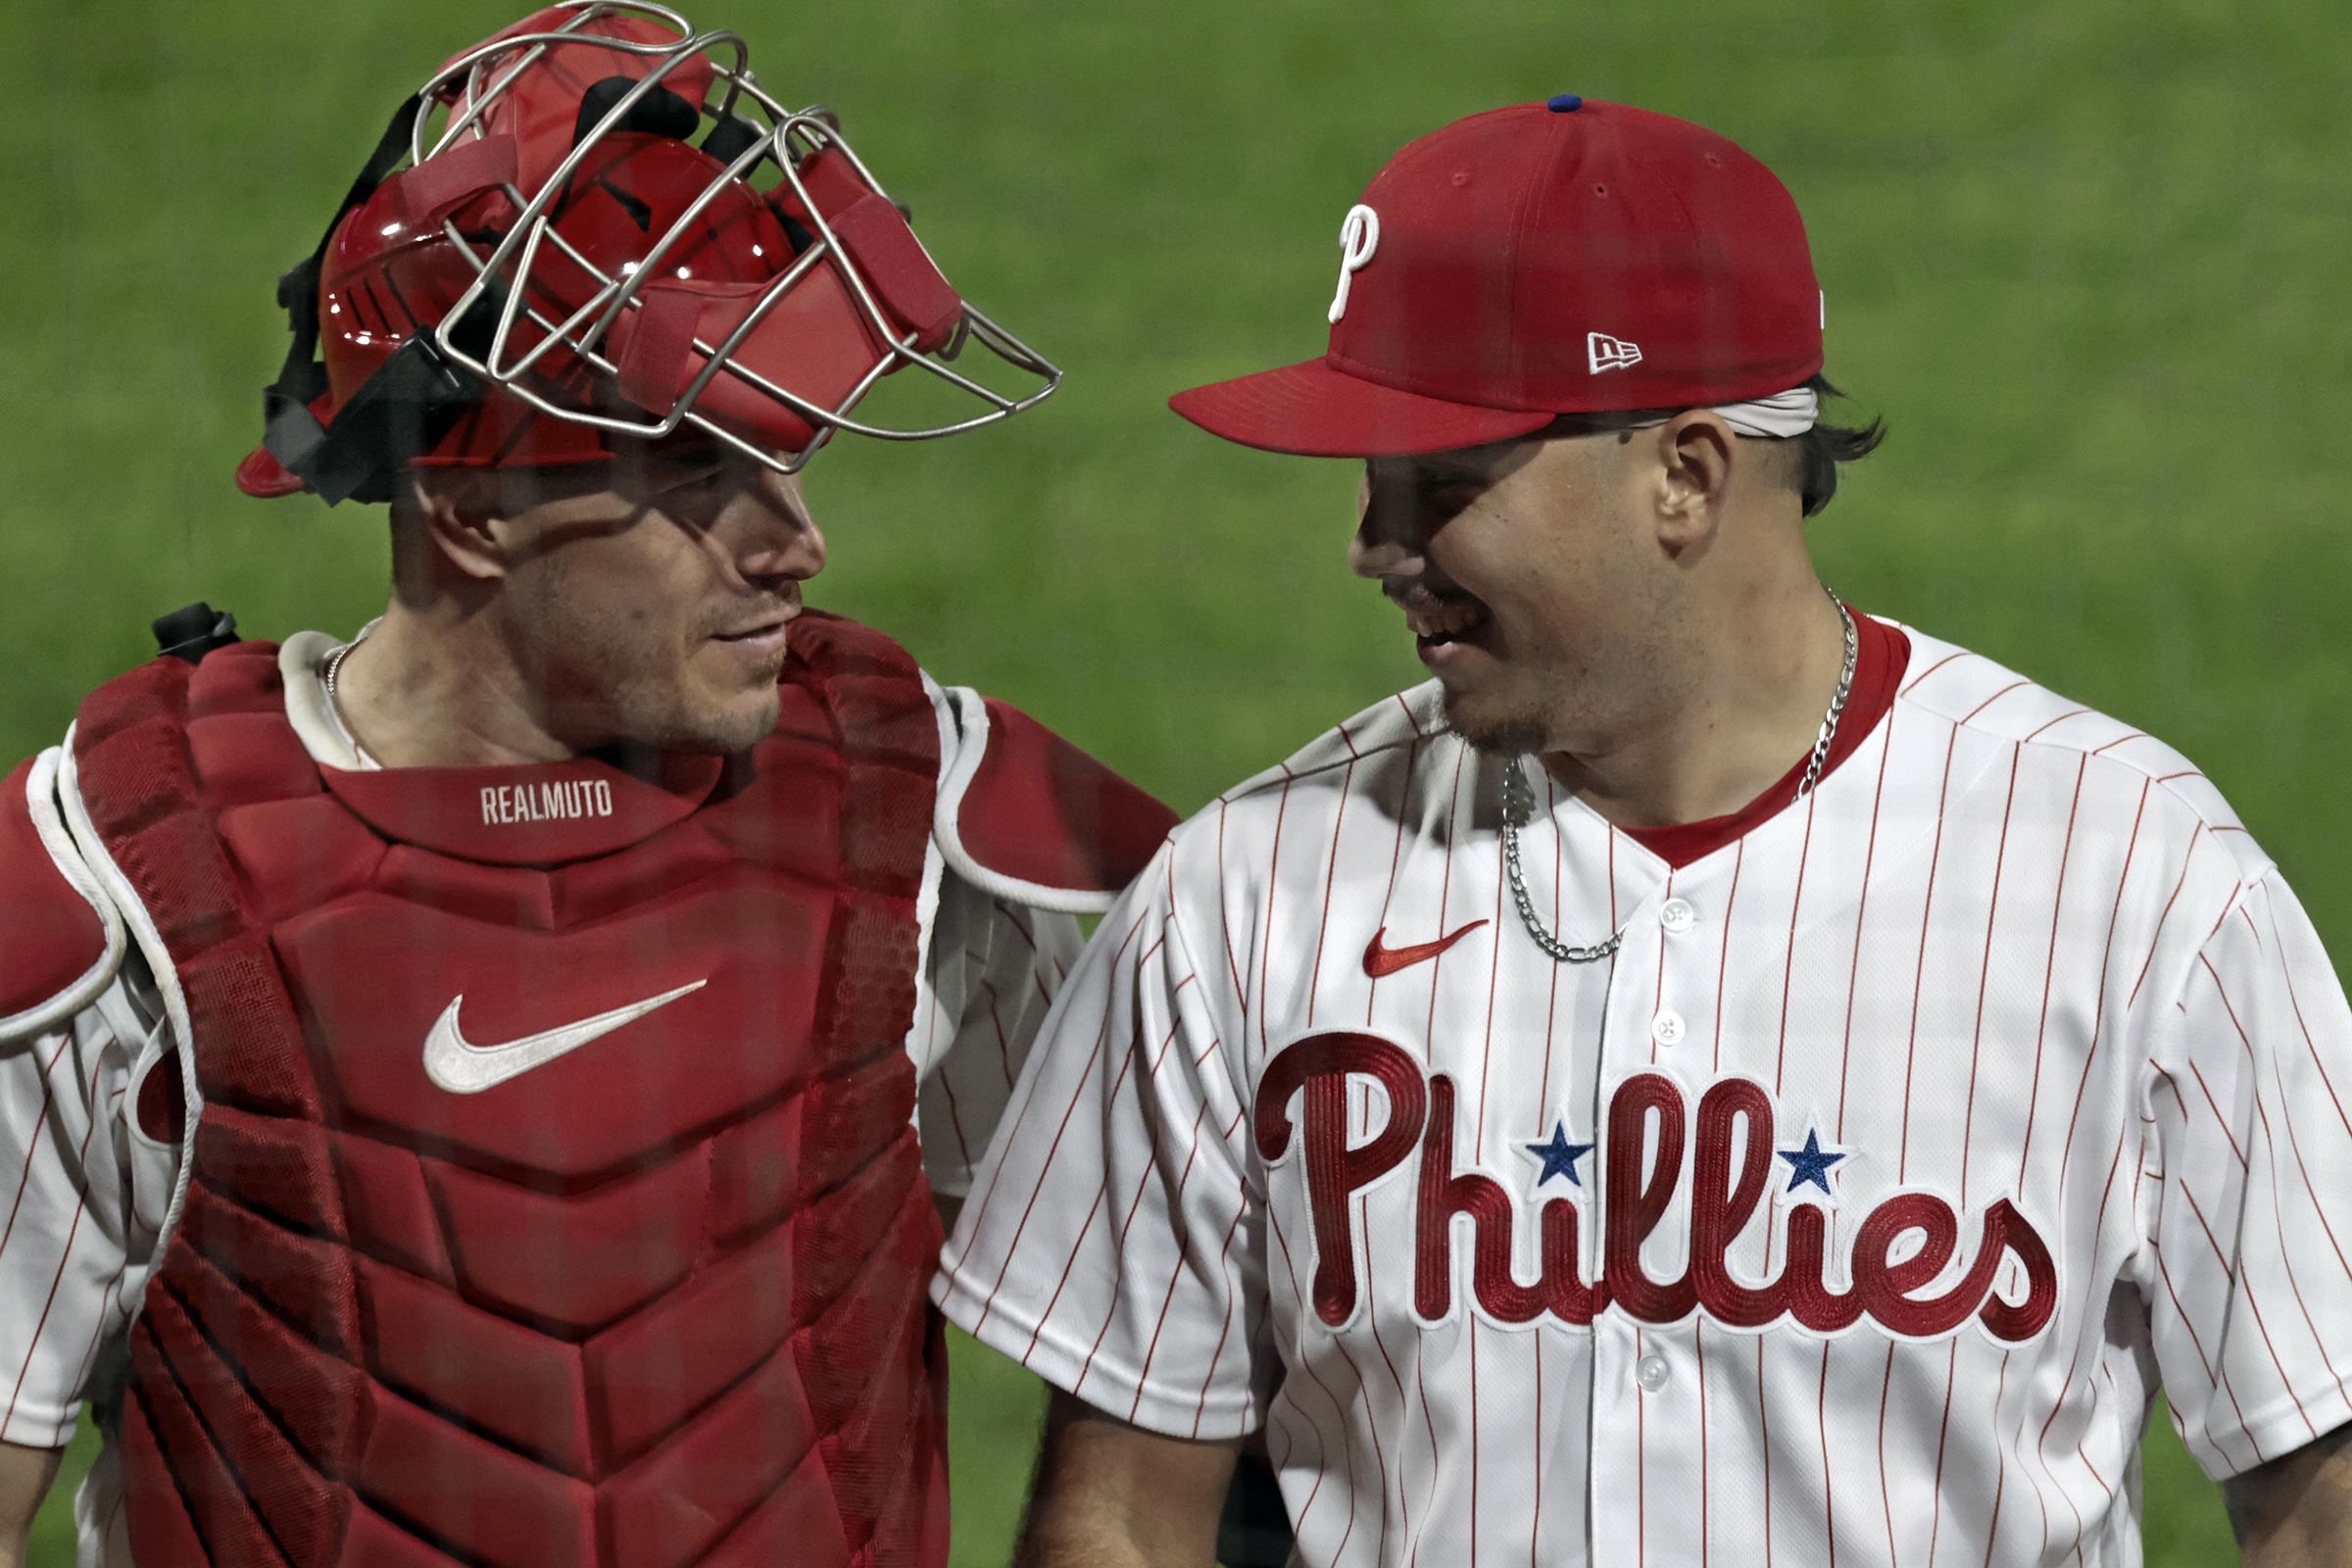 Phillies want department personnel in uniforms